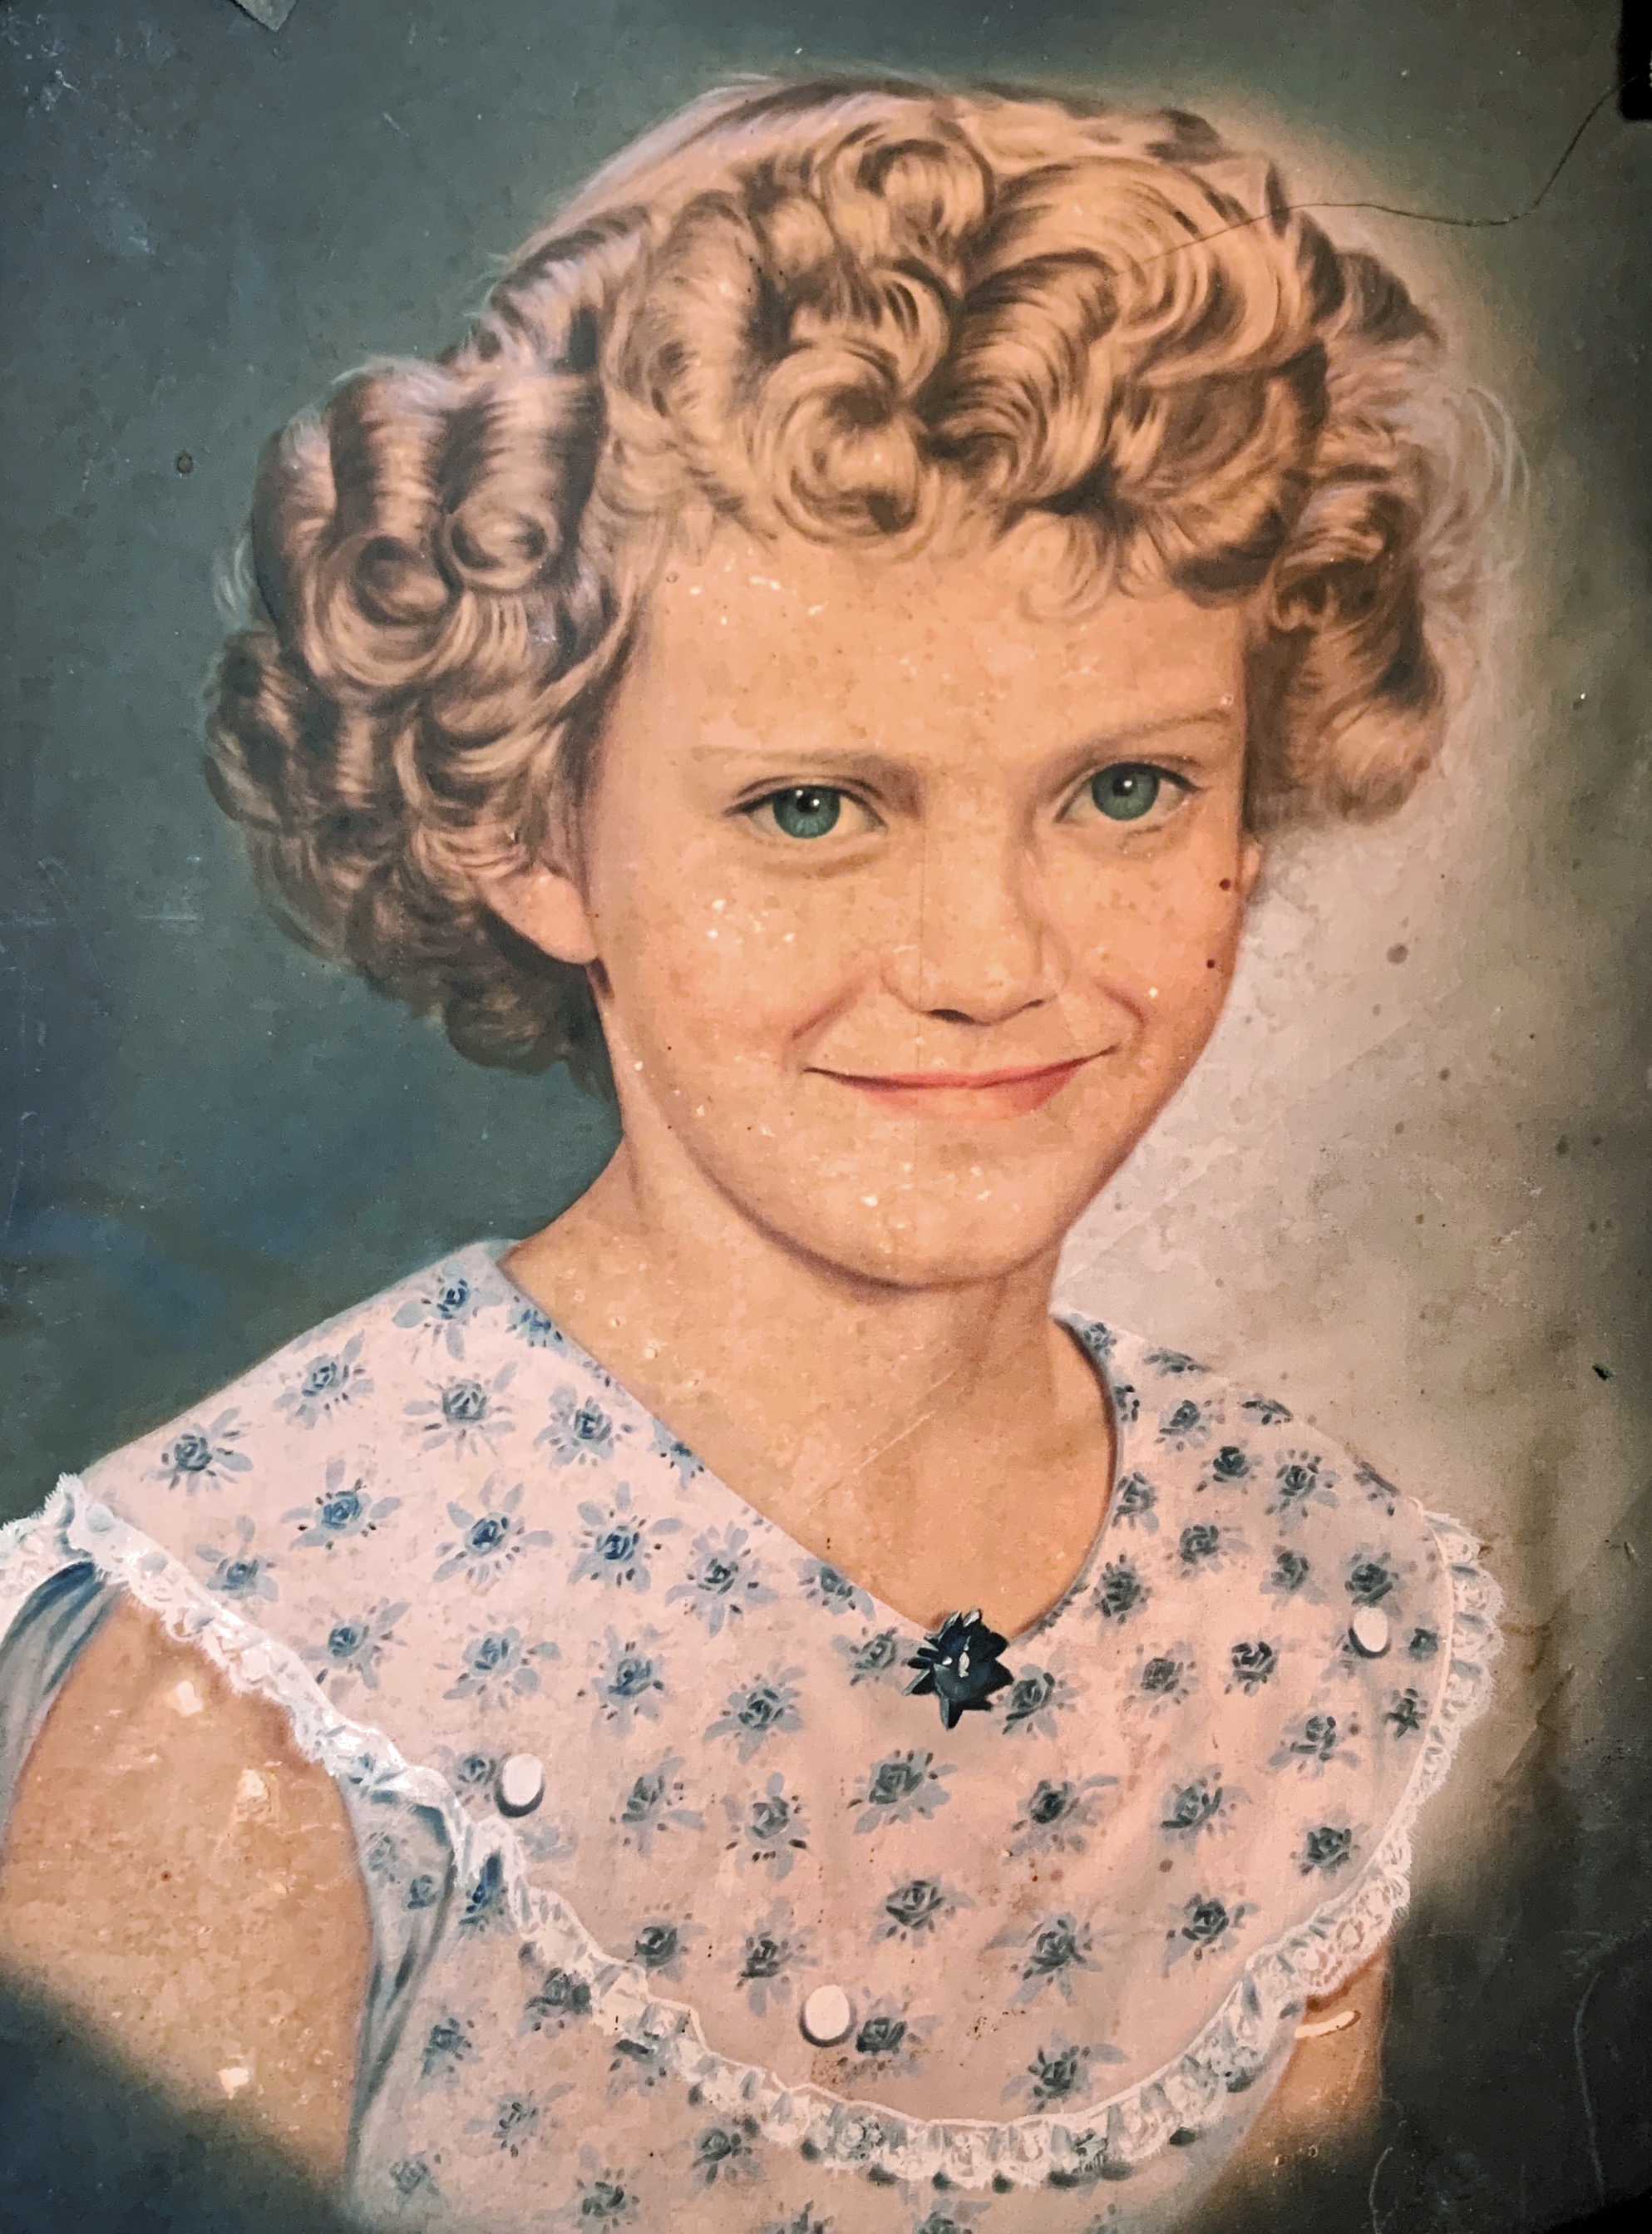 Lorene Ticknor- painted when she was about 7 years old. 1957